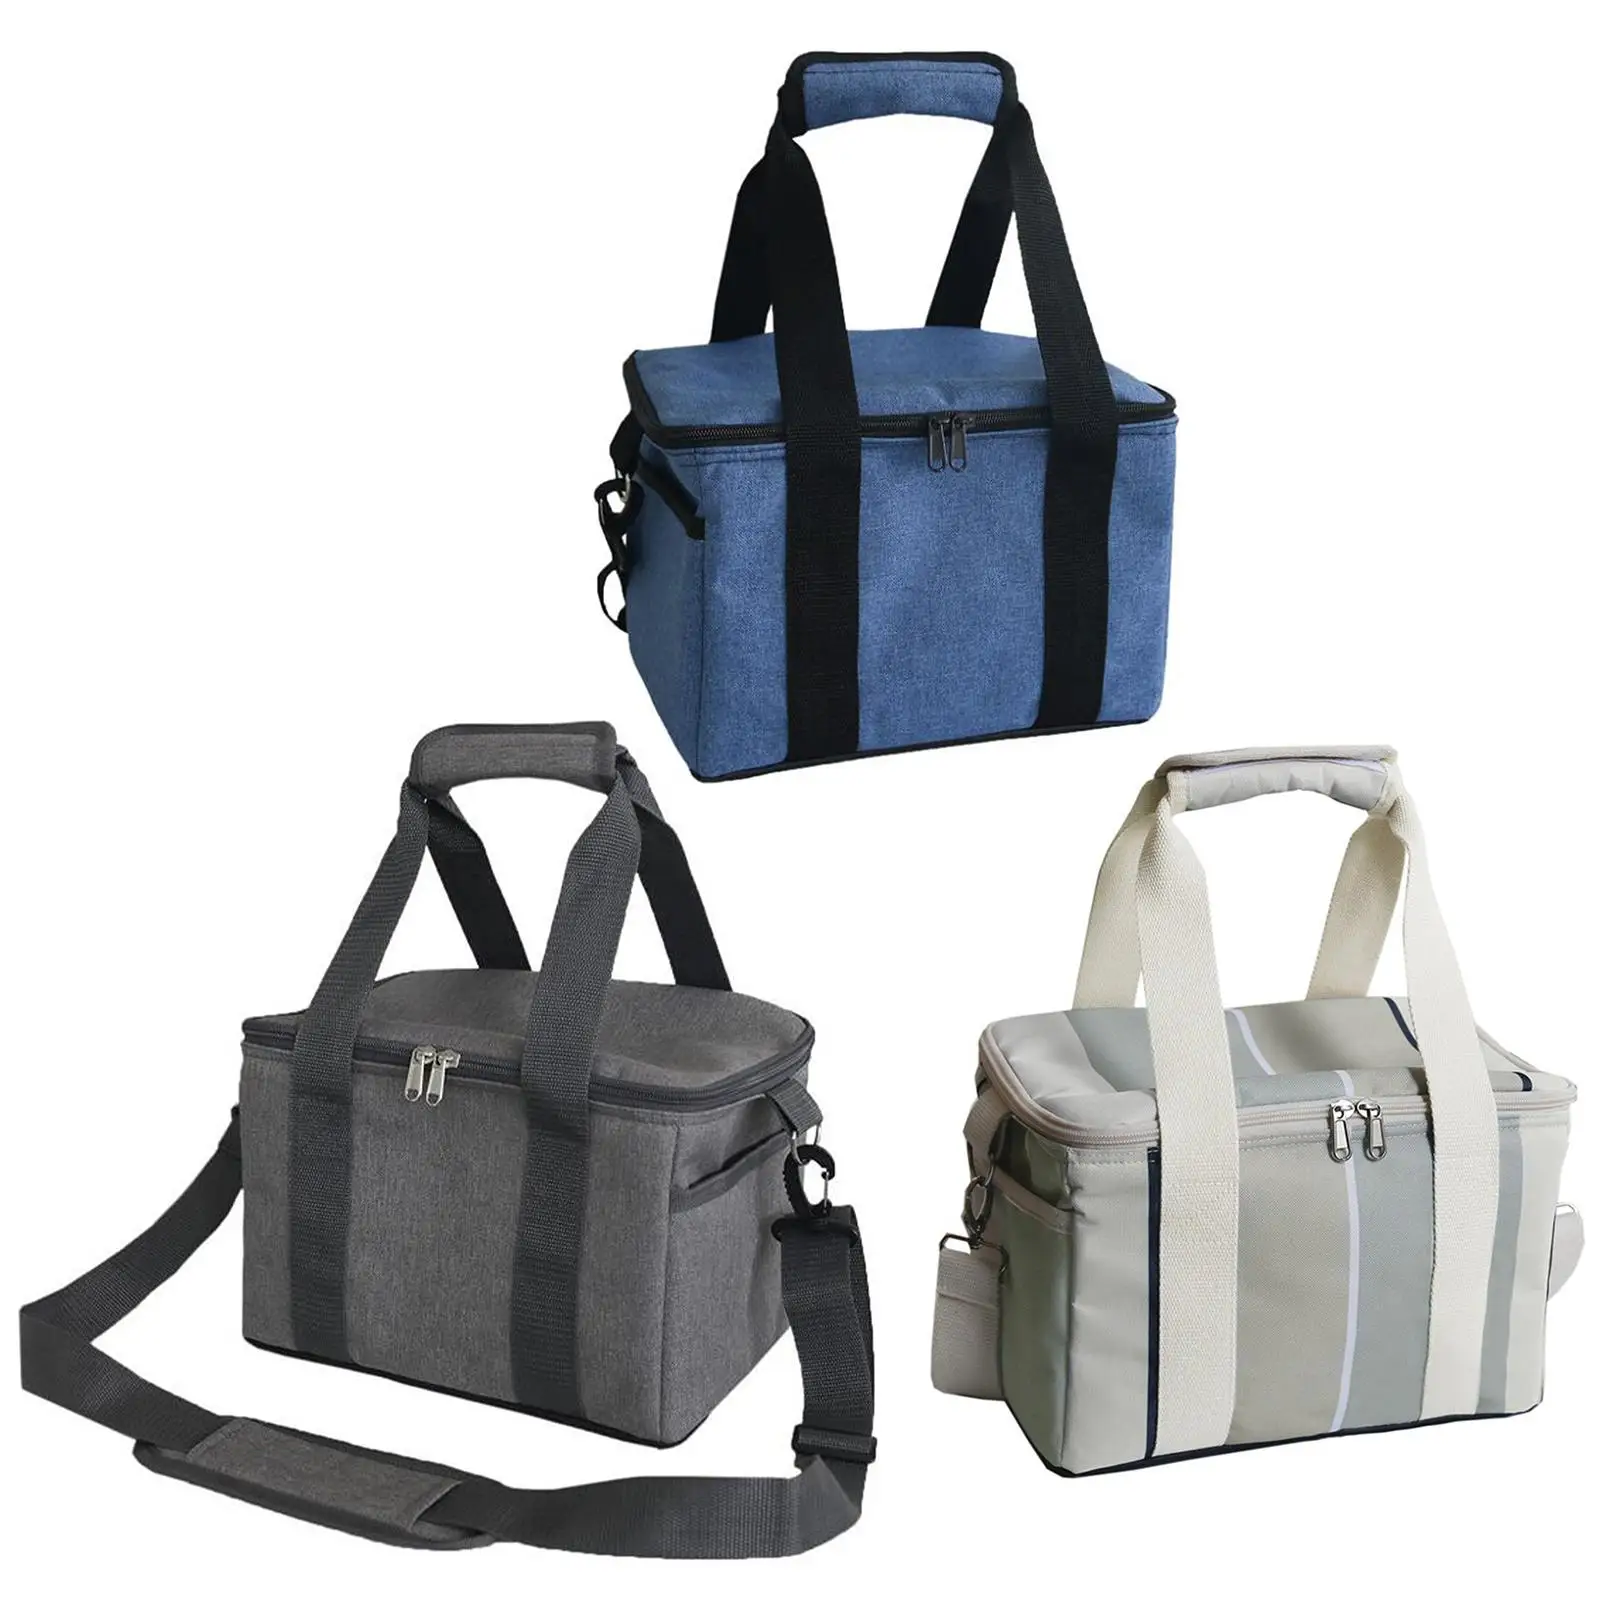 Large Capacity Insulated Food Cooler Bag Thermal  Carrier Storage Handbag Outdoor Camping BBQ Picnic Hand Bags